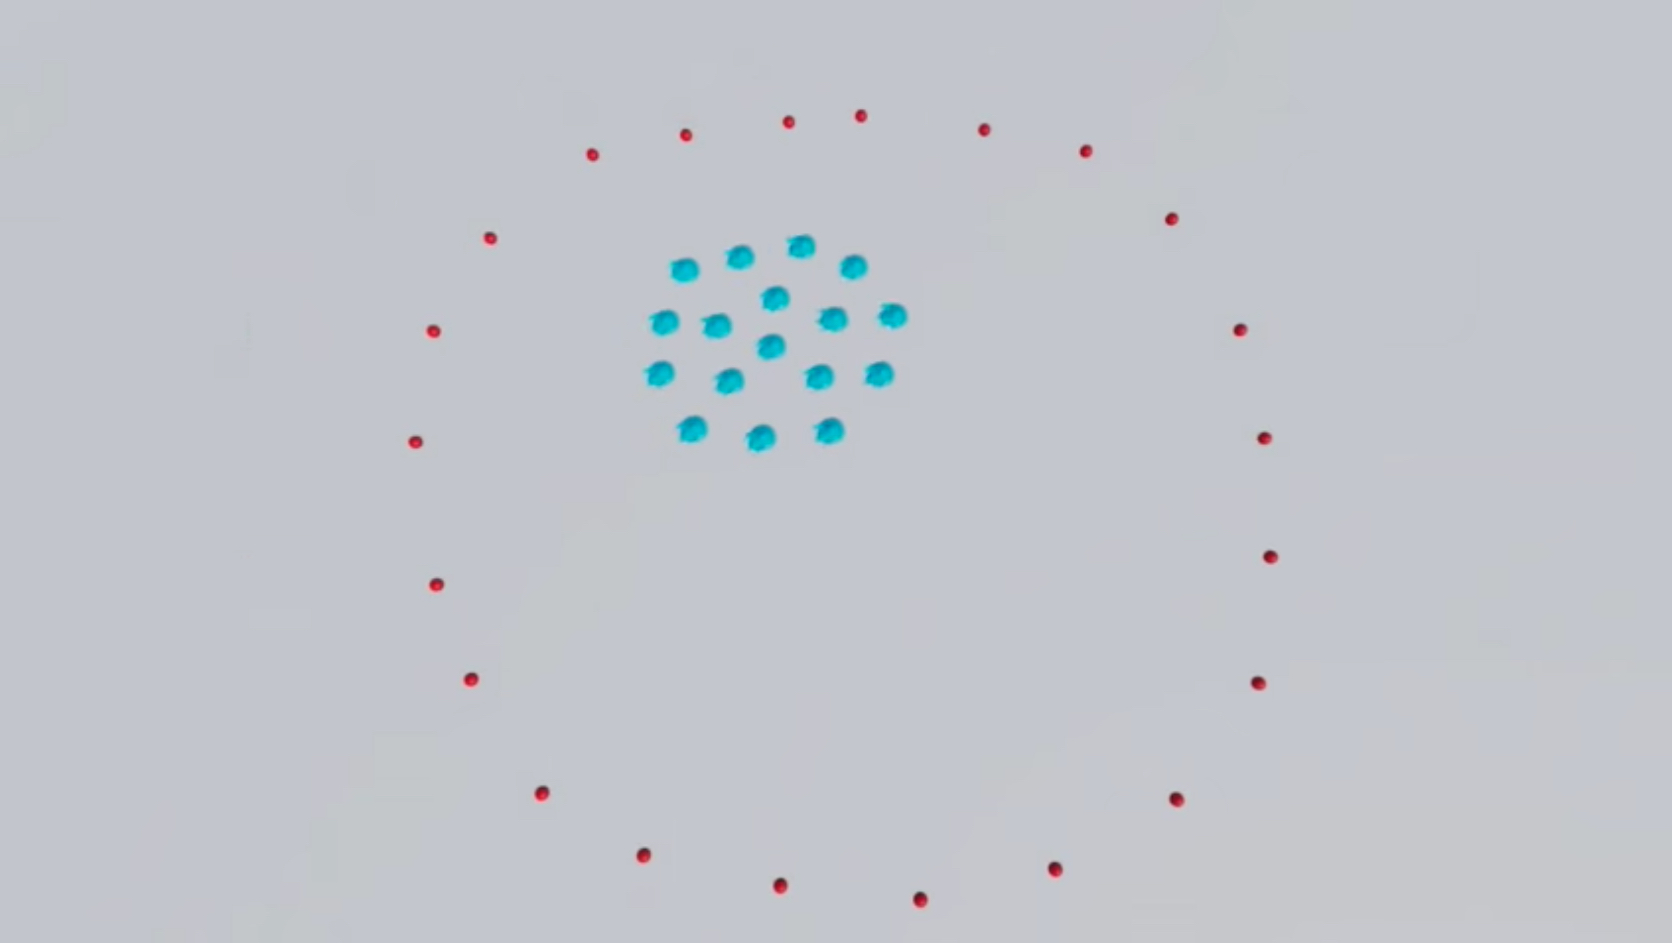 Emergent behavior: agents fenced in using red dots